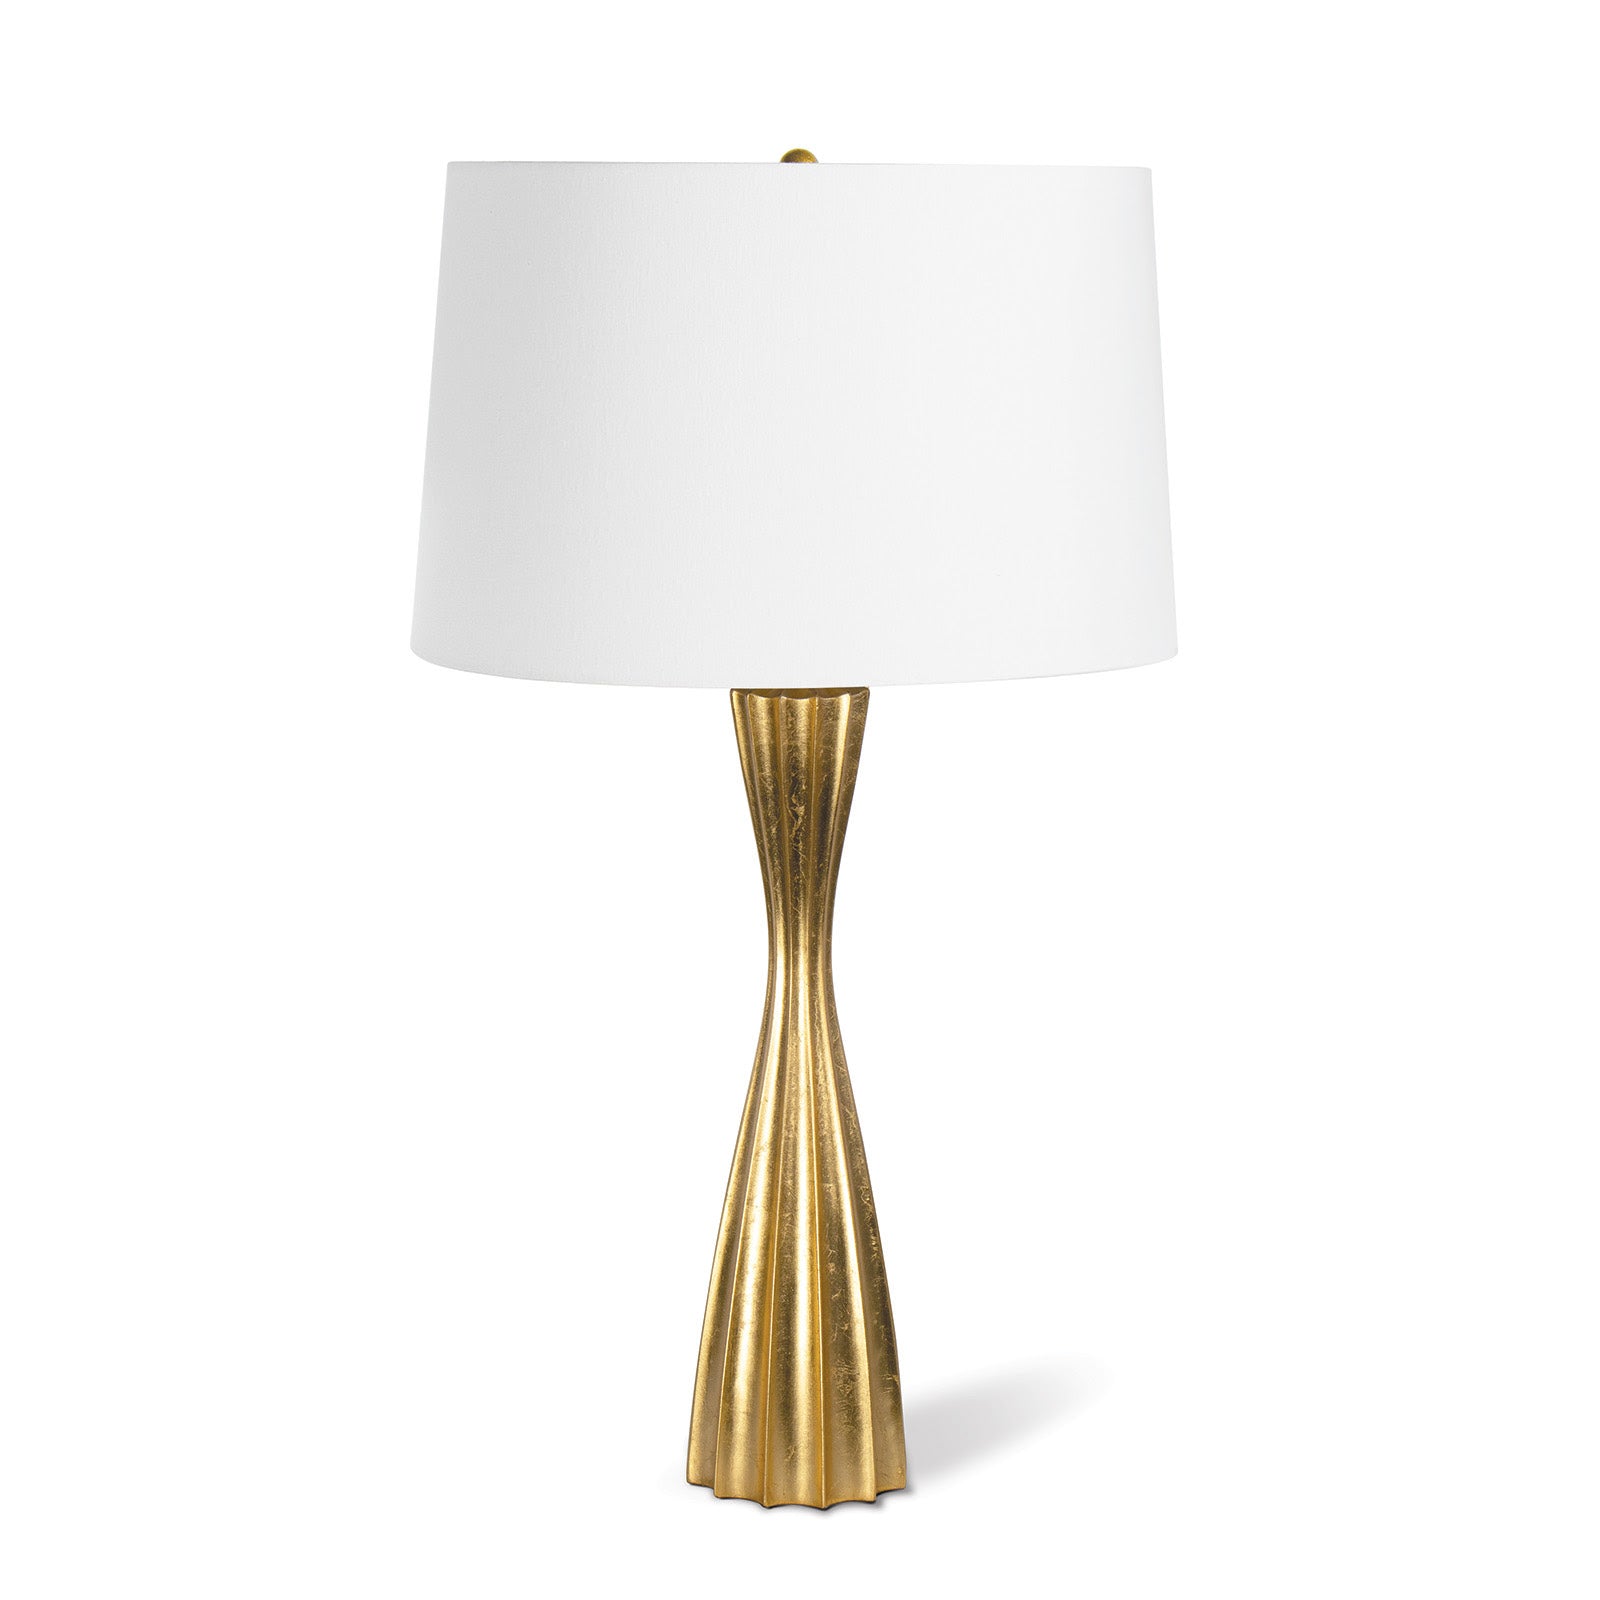 Southern Living Naomi Resin Table Lamp in Gold Leaf